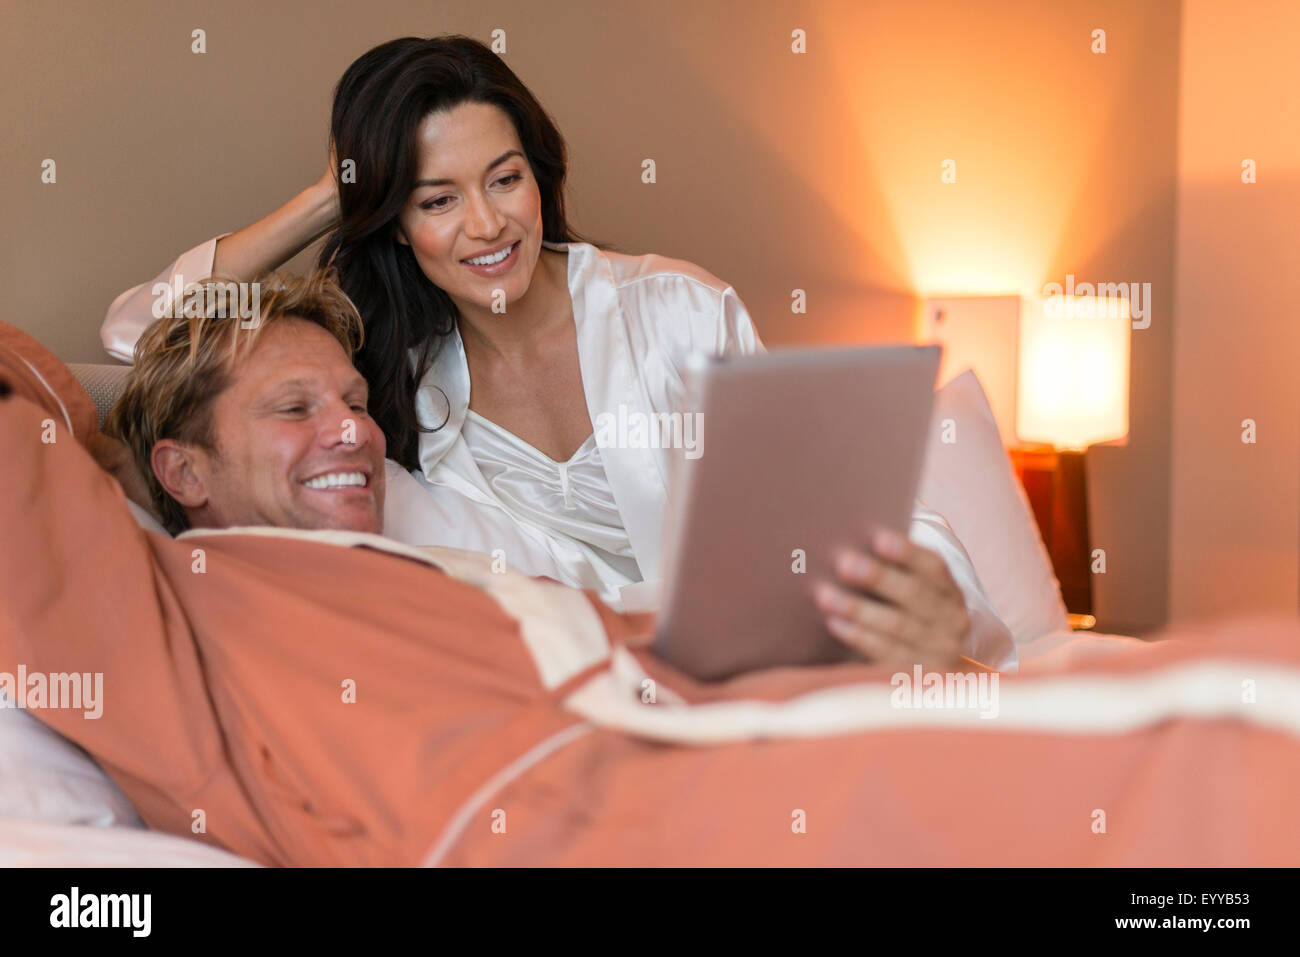 Couple using digital tablet on bed Stock Photo